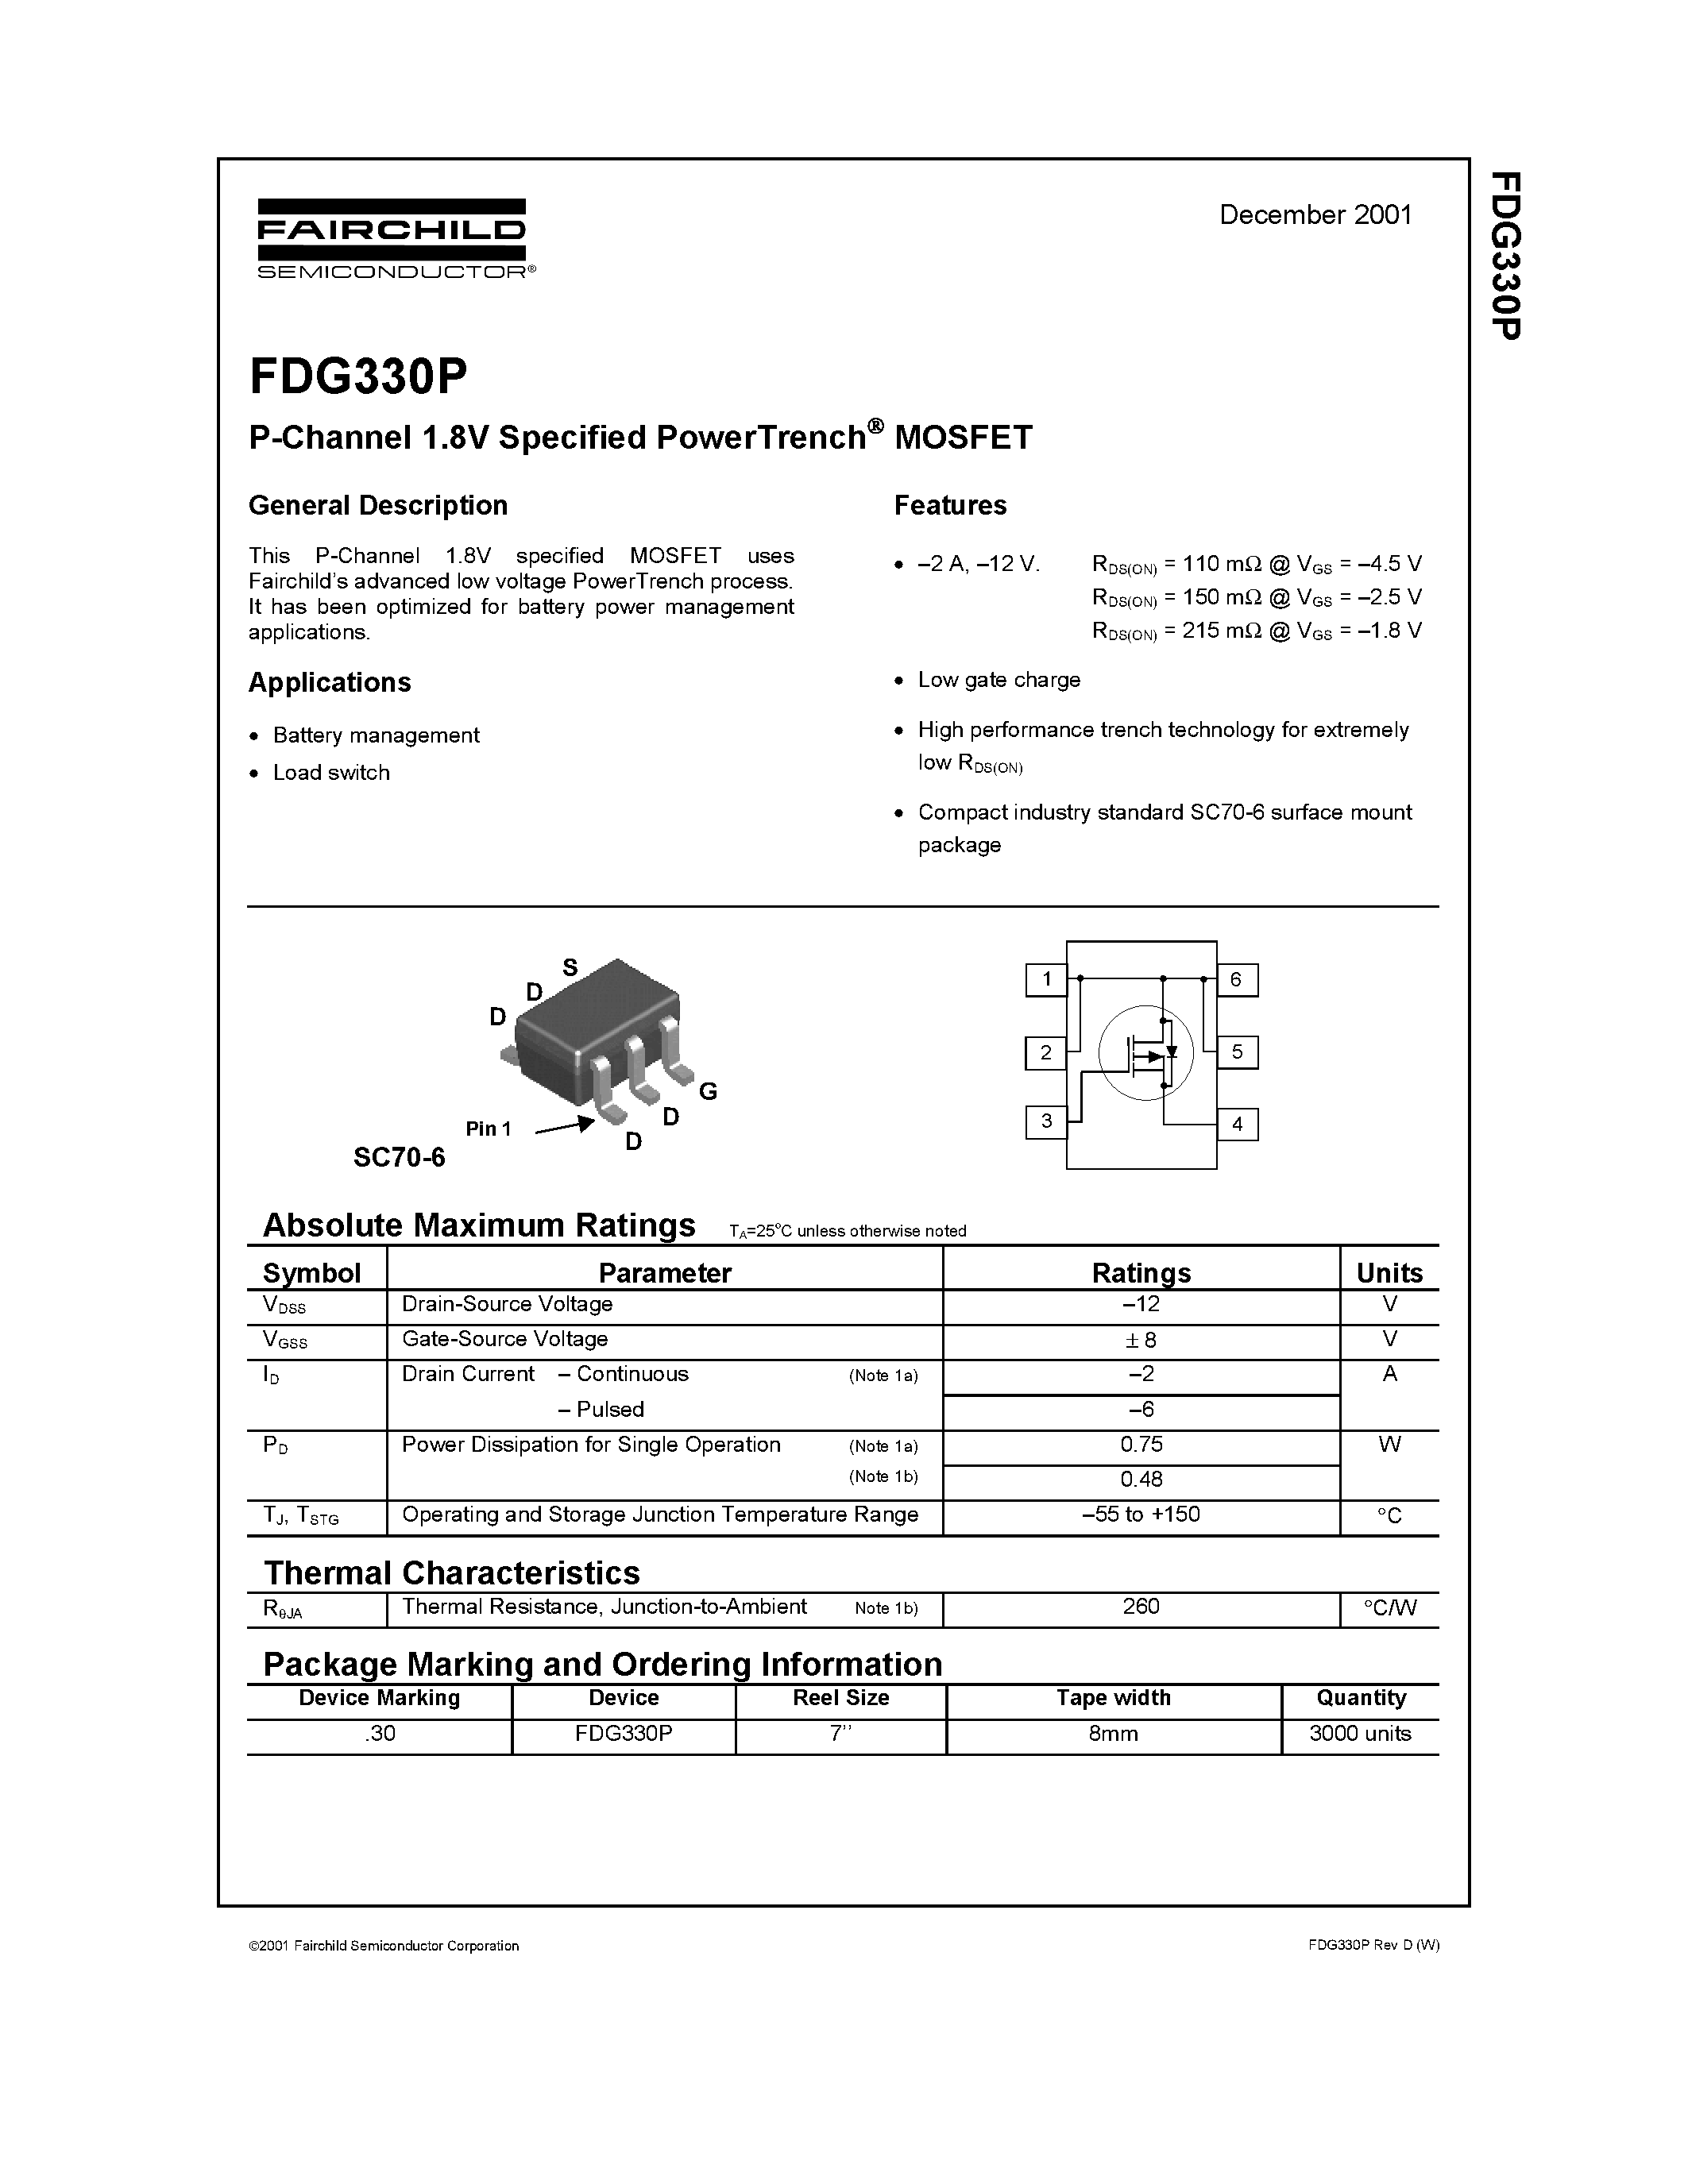 Даташит FDG330P - P-Channel 1.8V Specified PowerTrench MOSFET страница 1